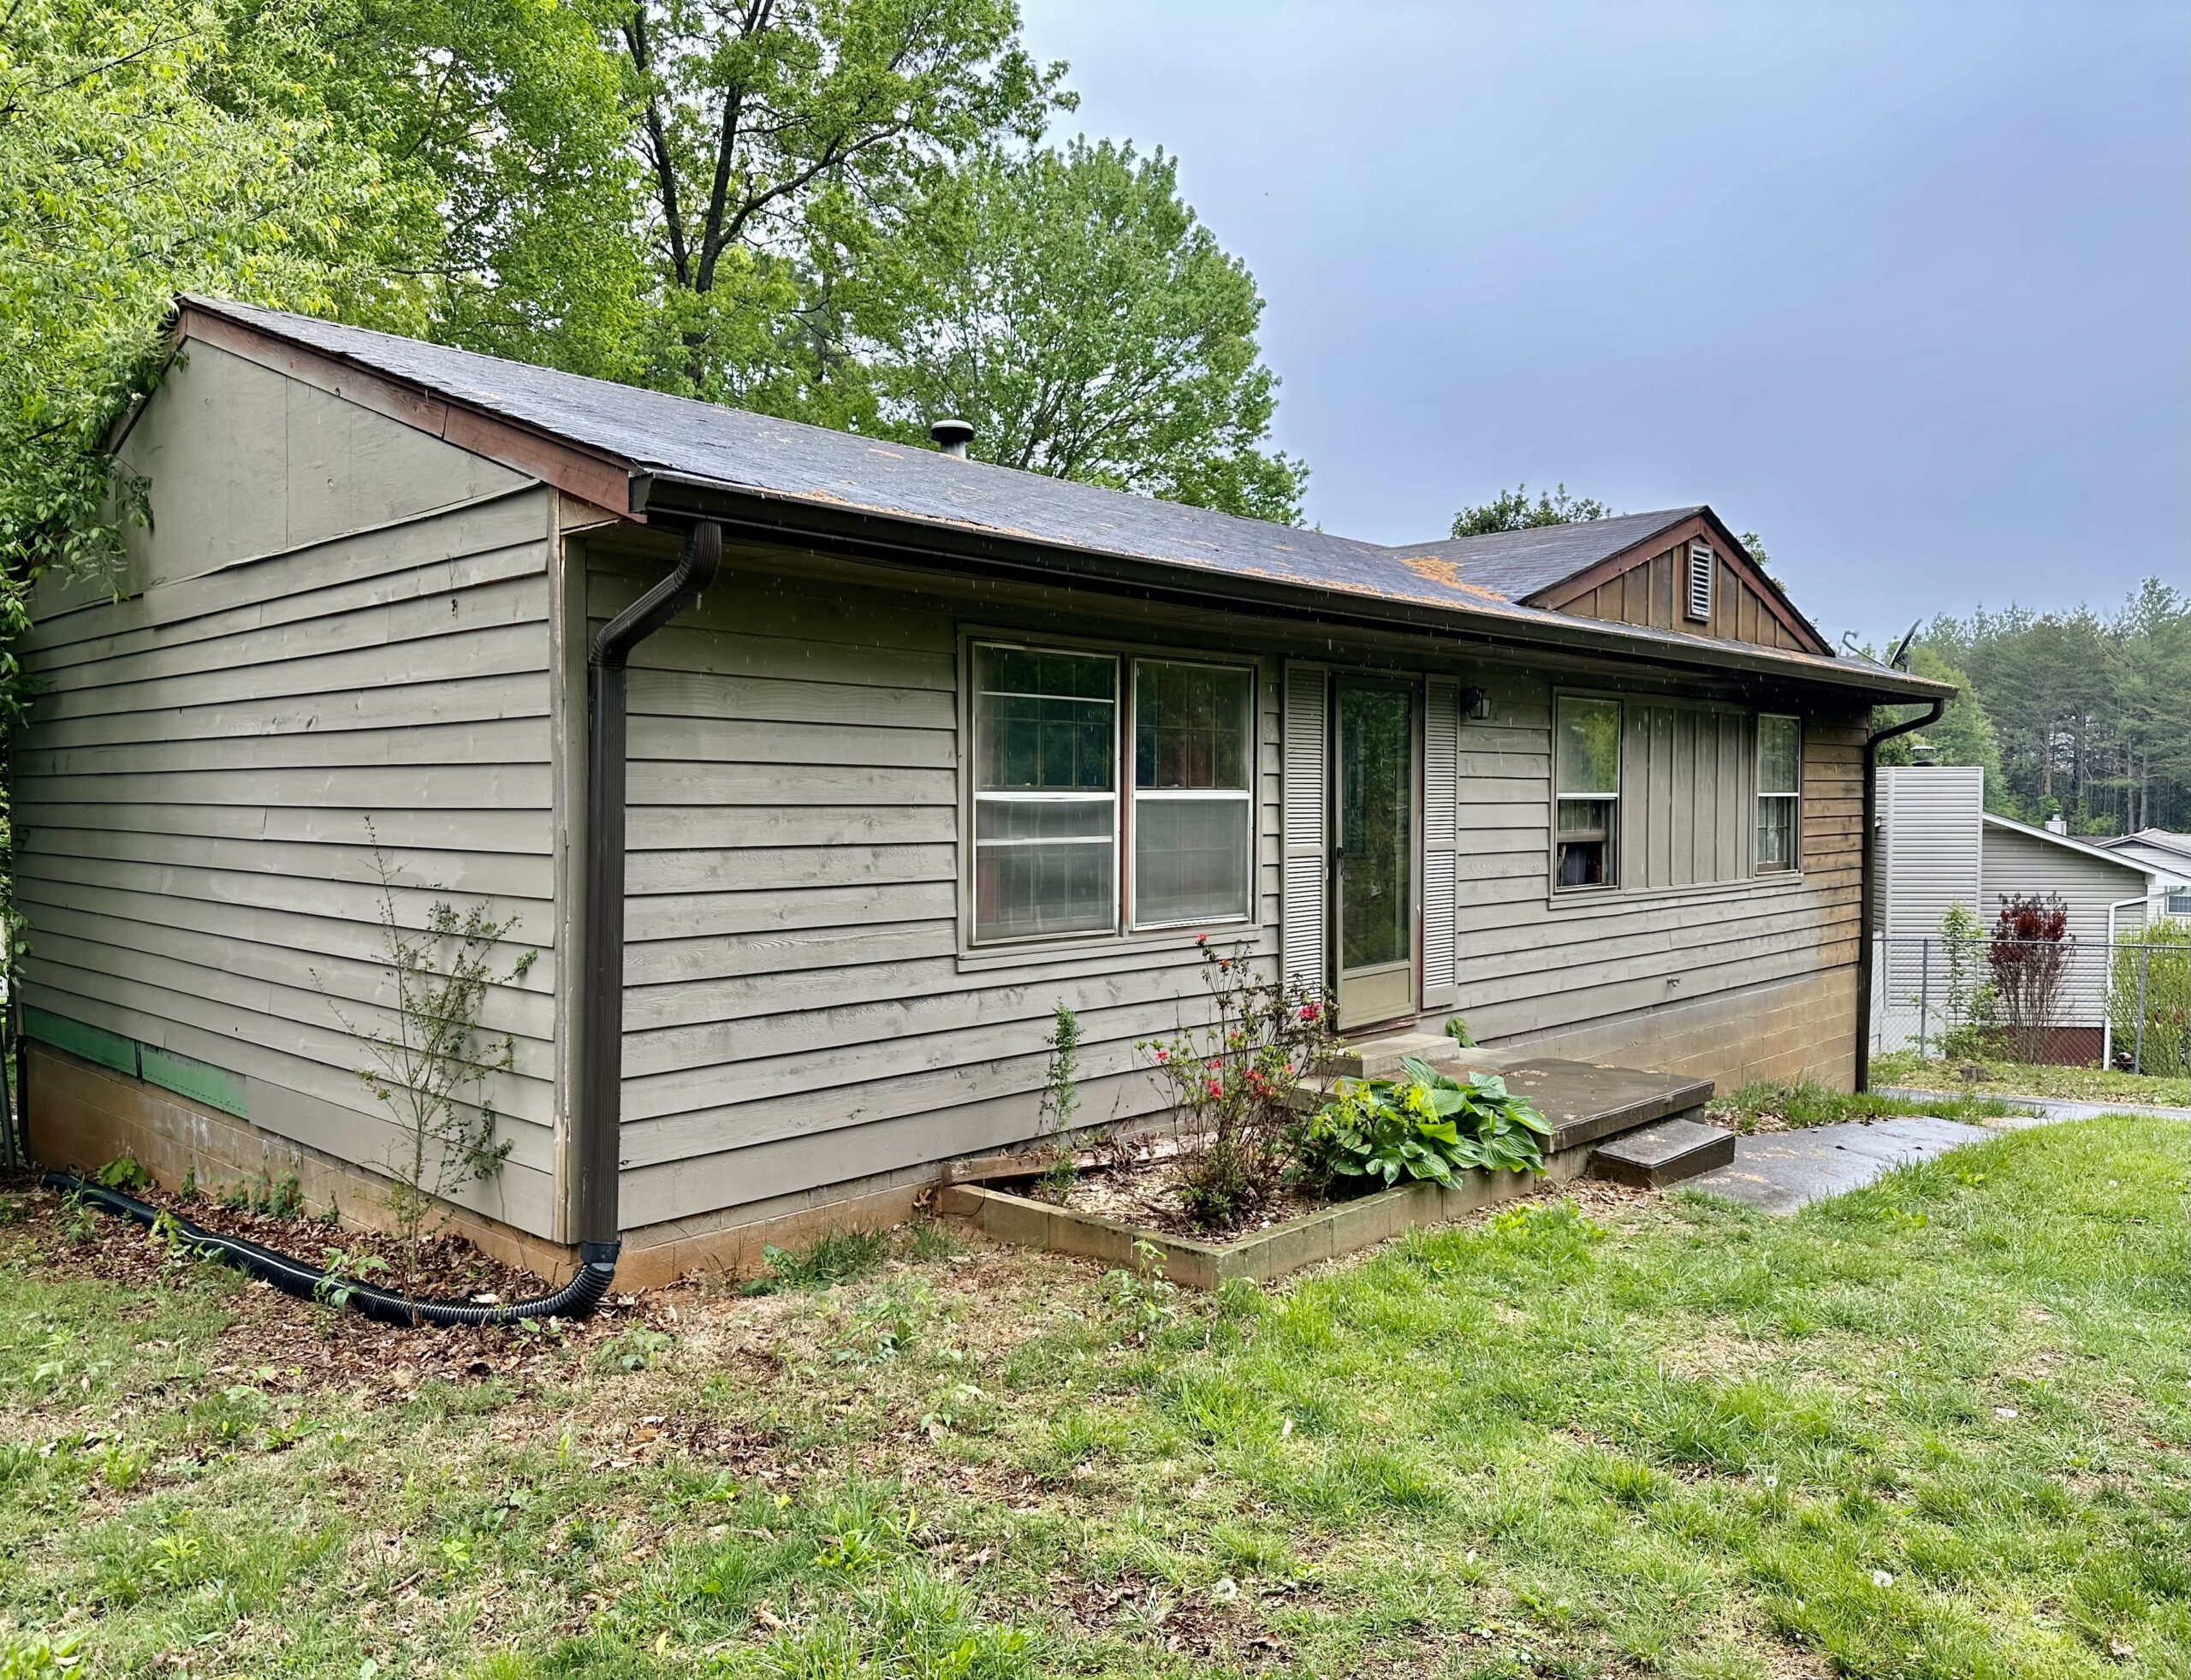 SOLD! 26 Wildwood Ave, Weaverville NC 28787